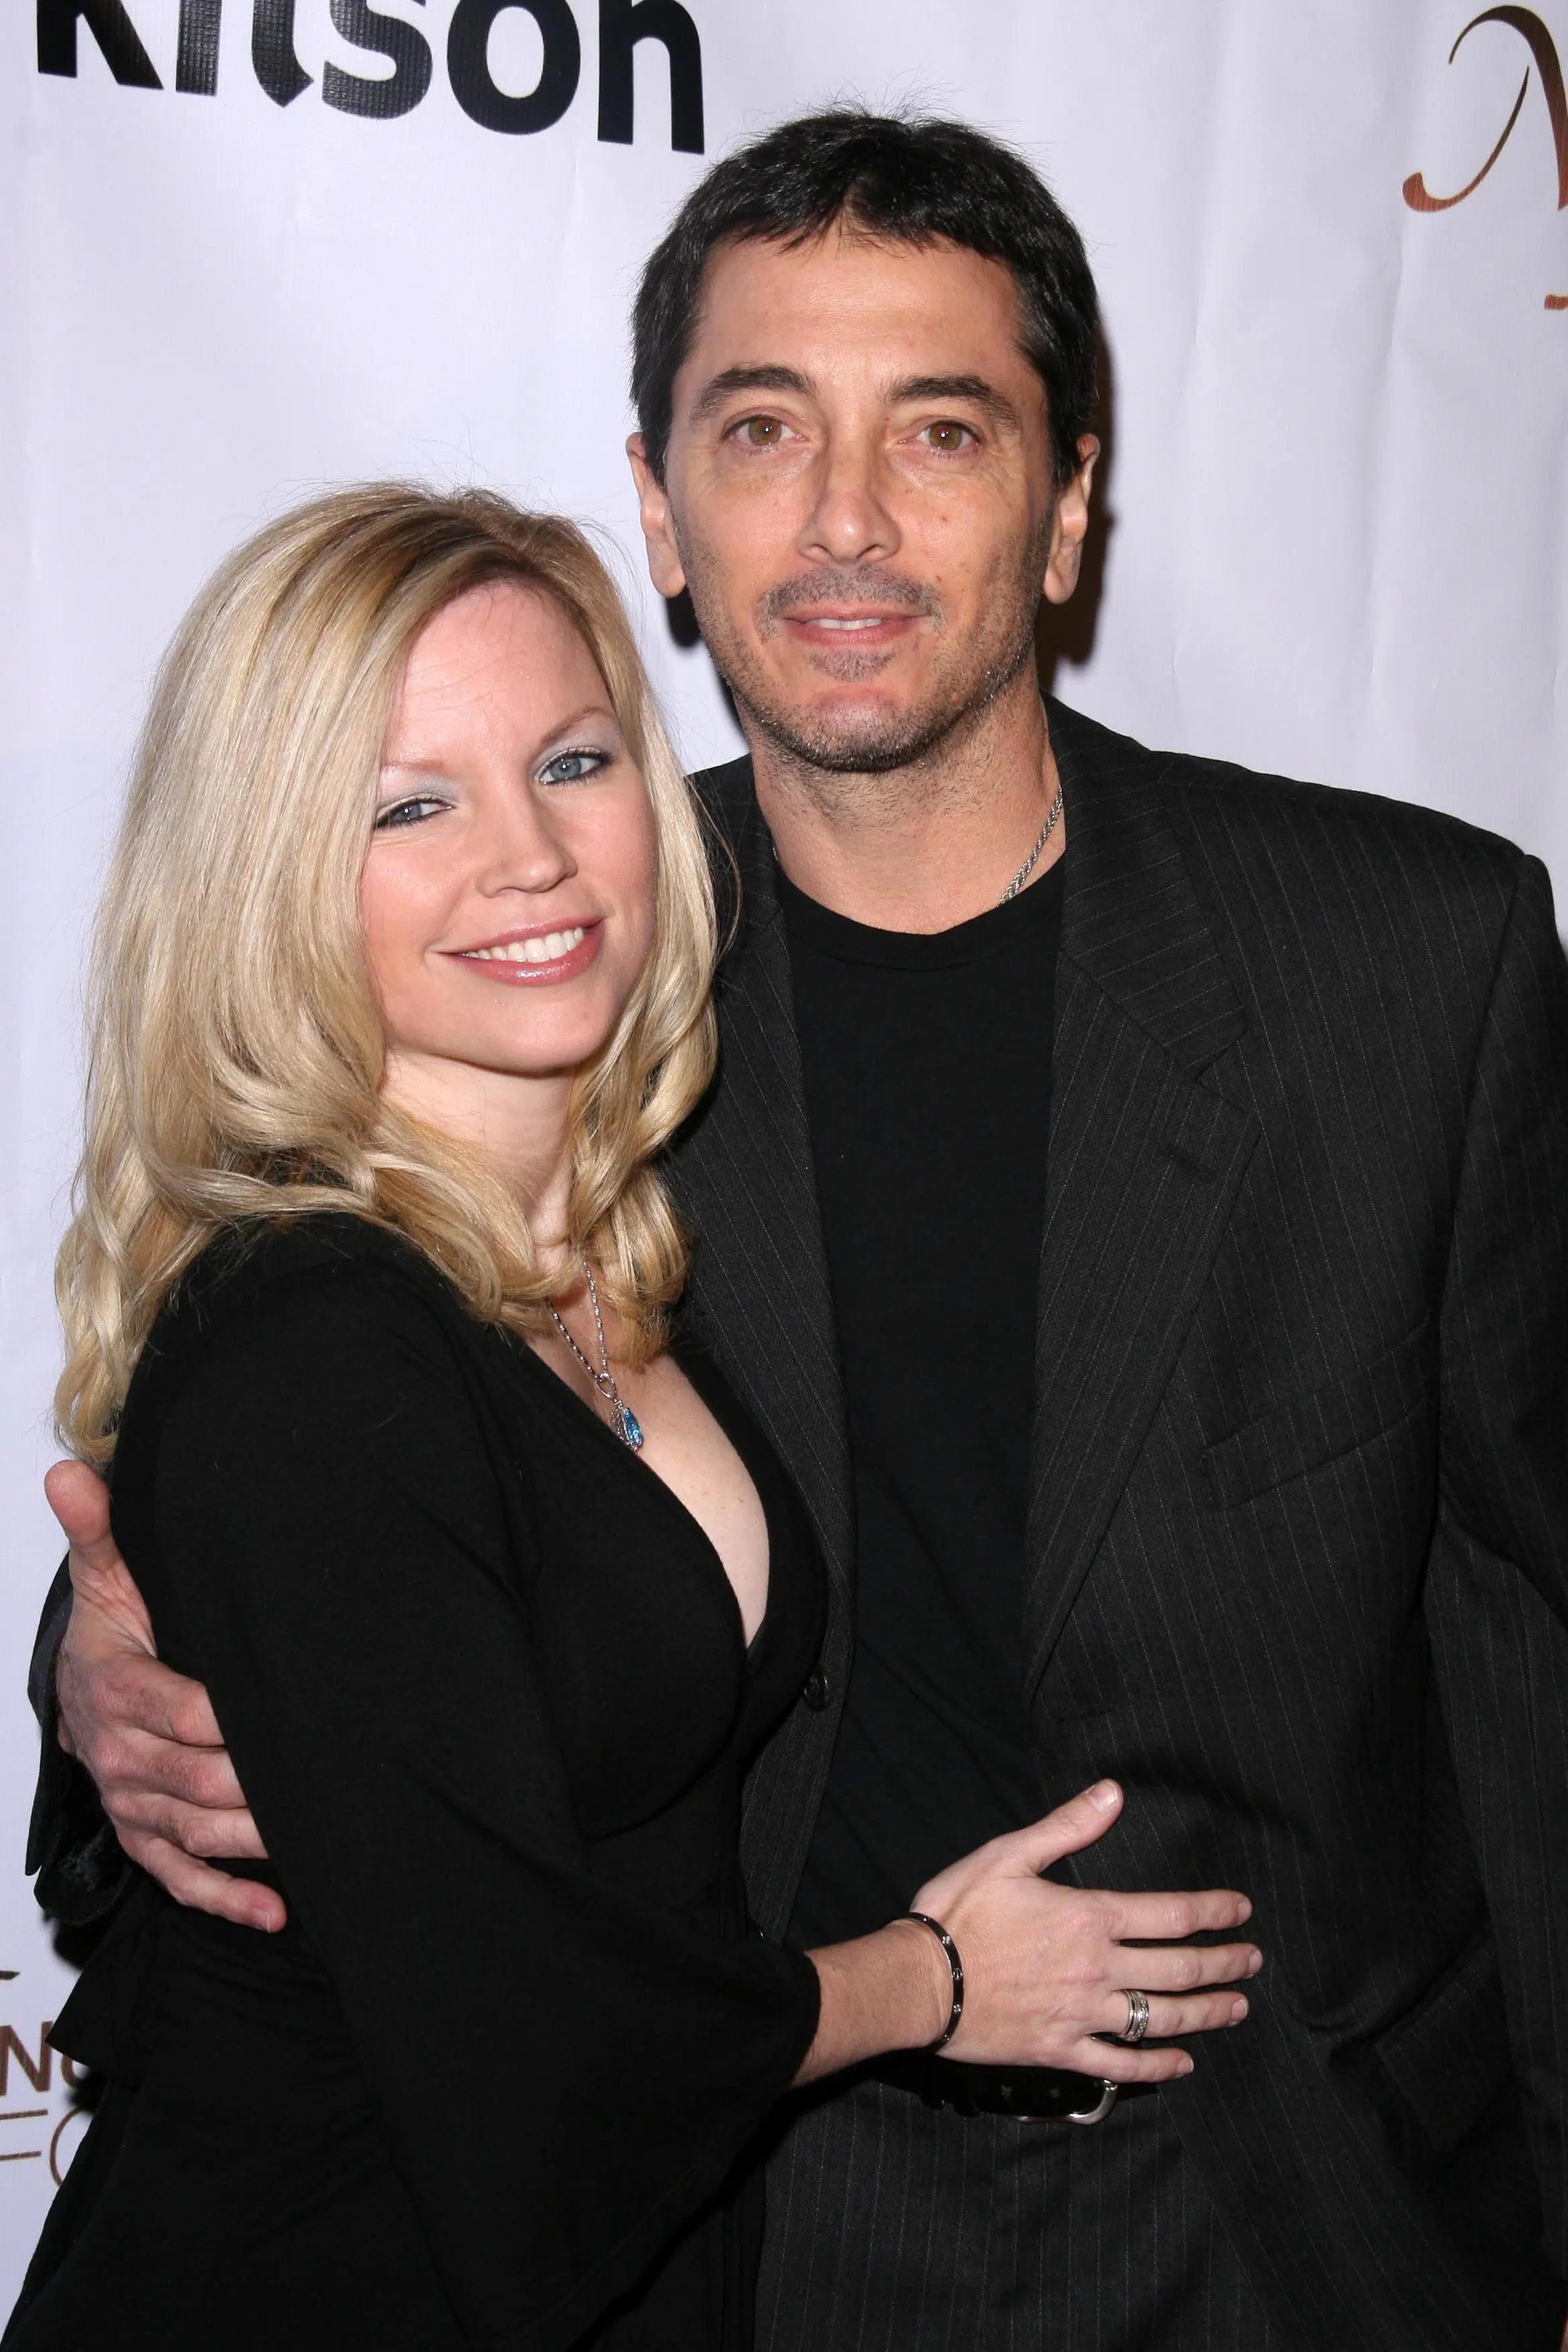 Renee Sloan and Scott Baio at the Stand Up To Cancer Charity Merchandise Launch